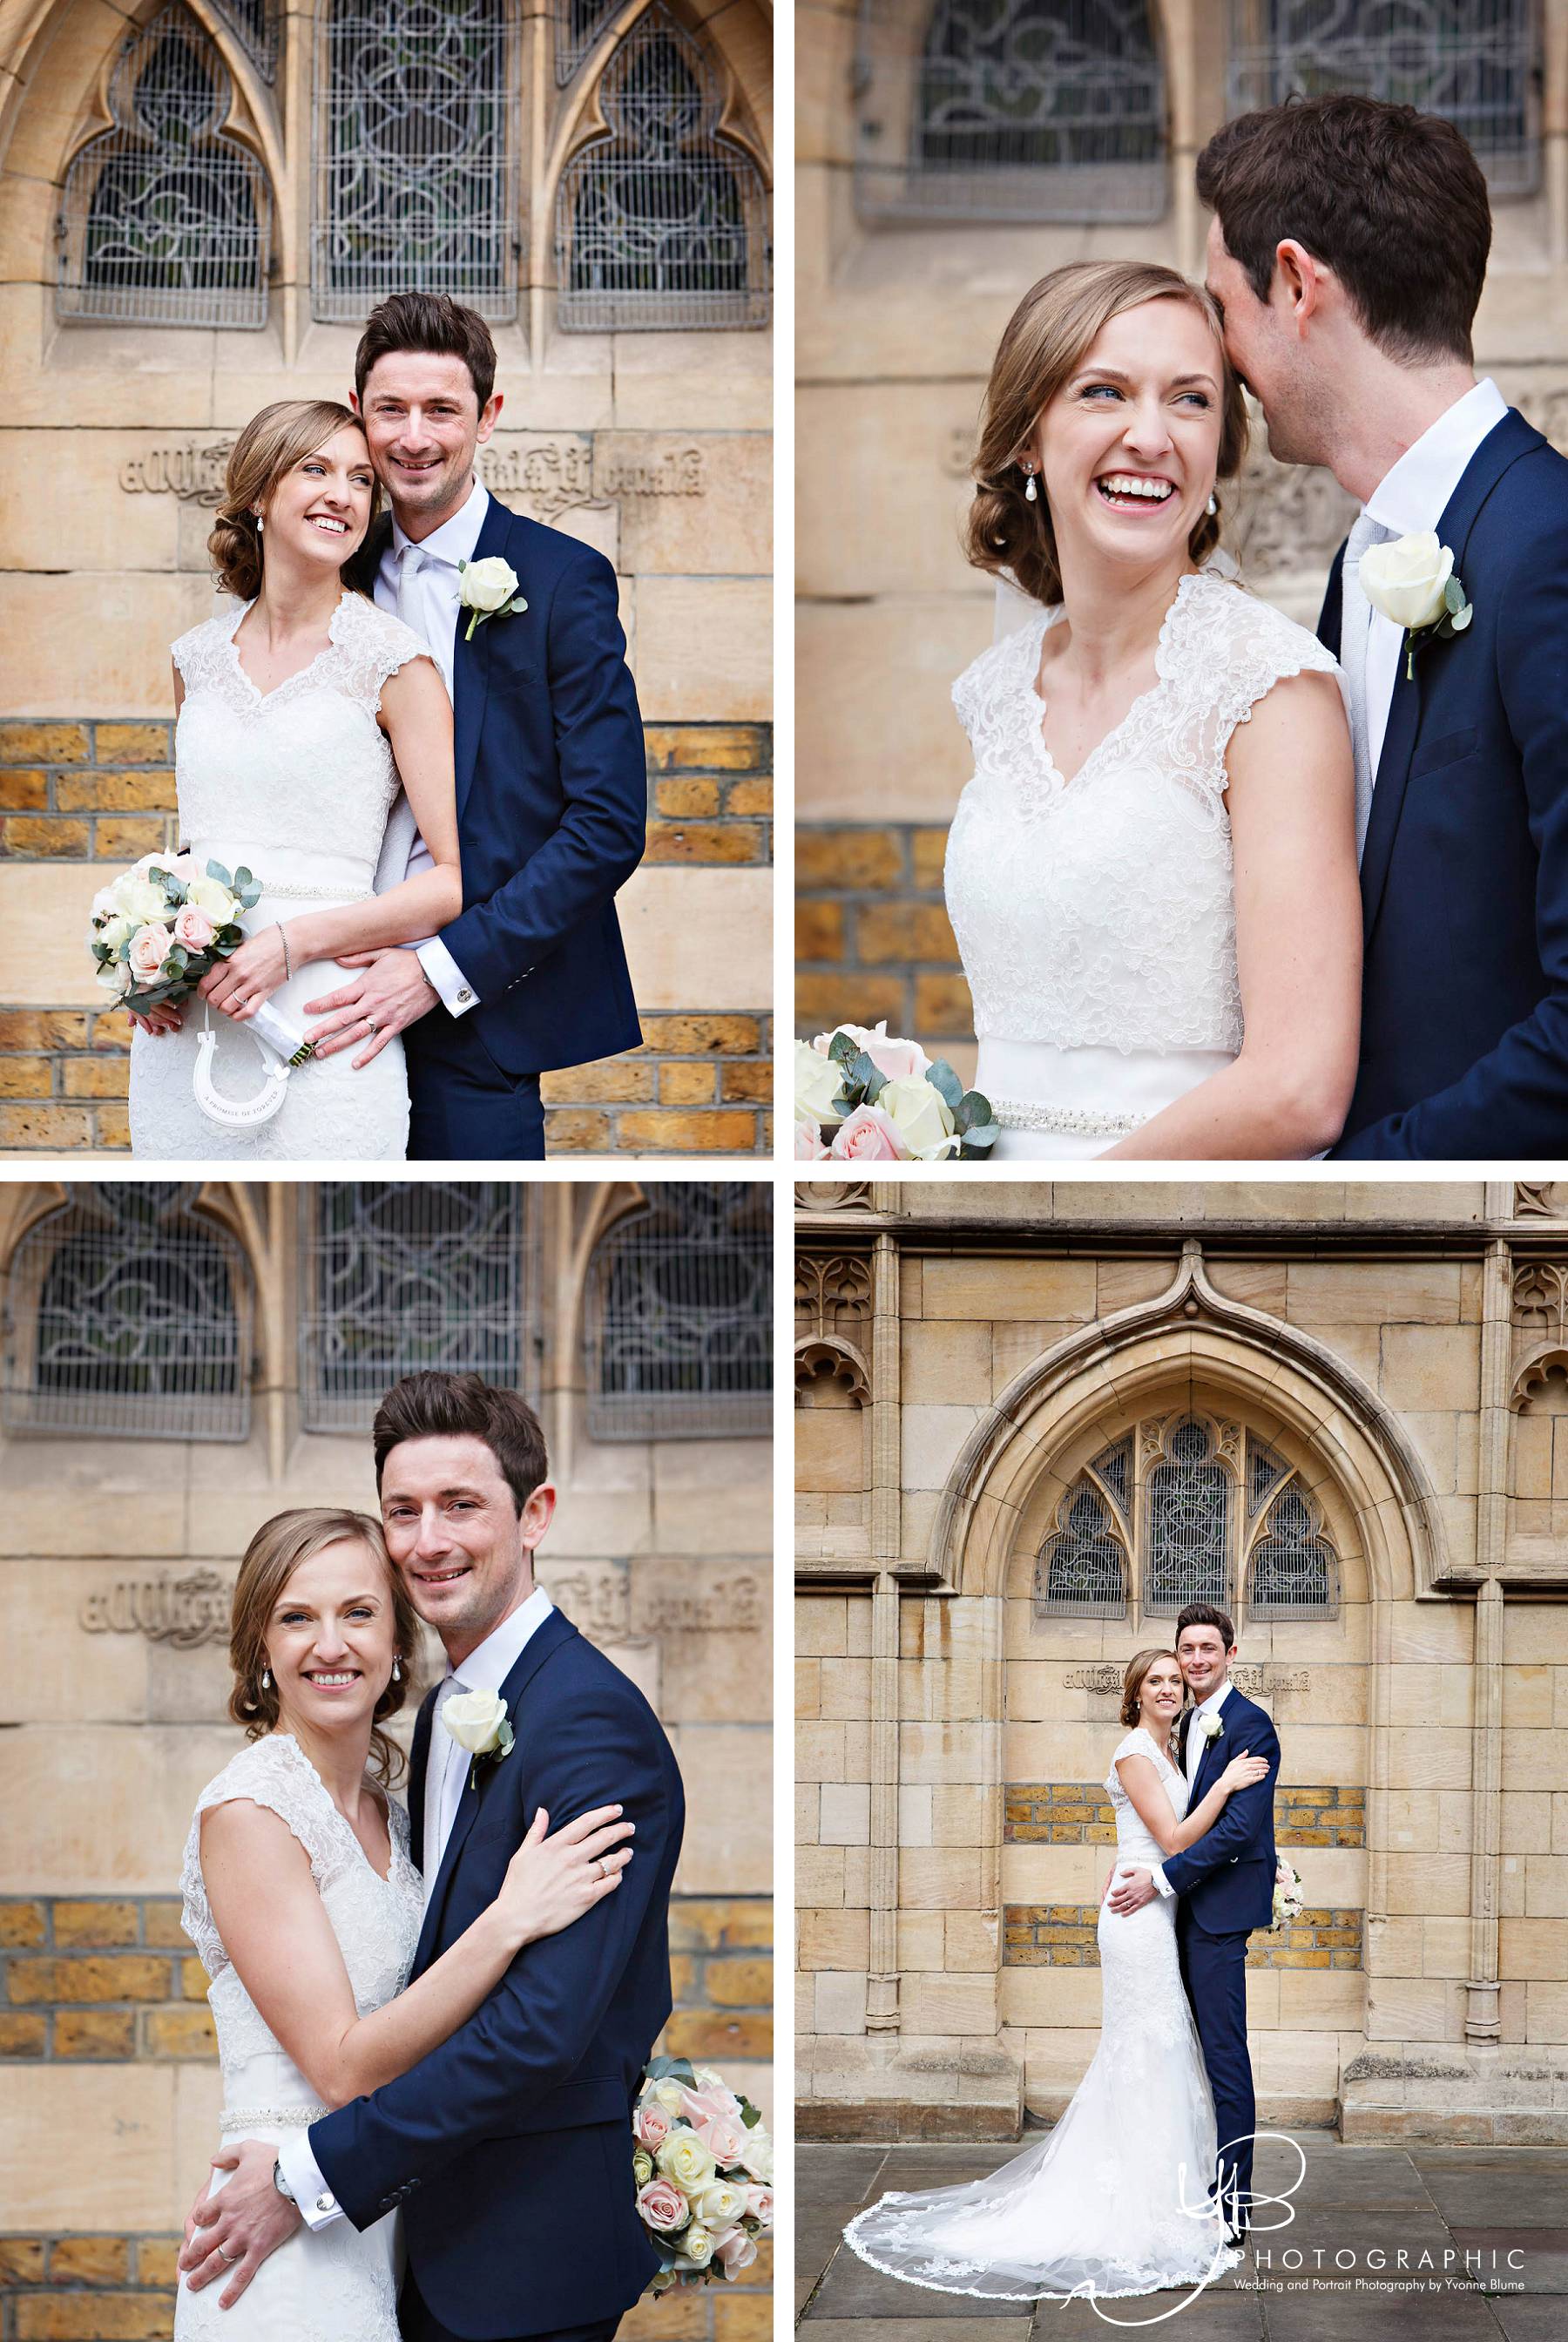 Gorgeous Bride and Groom portraits outside Christchurch in Chelsea